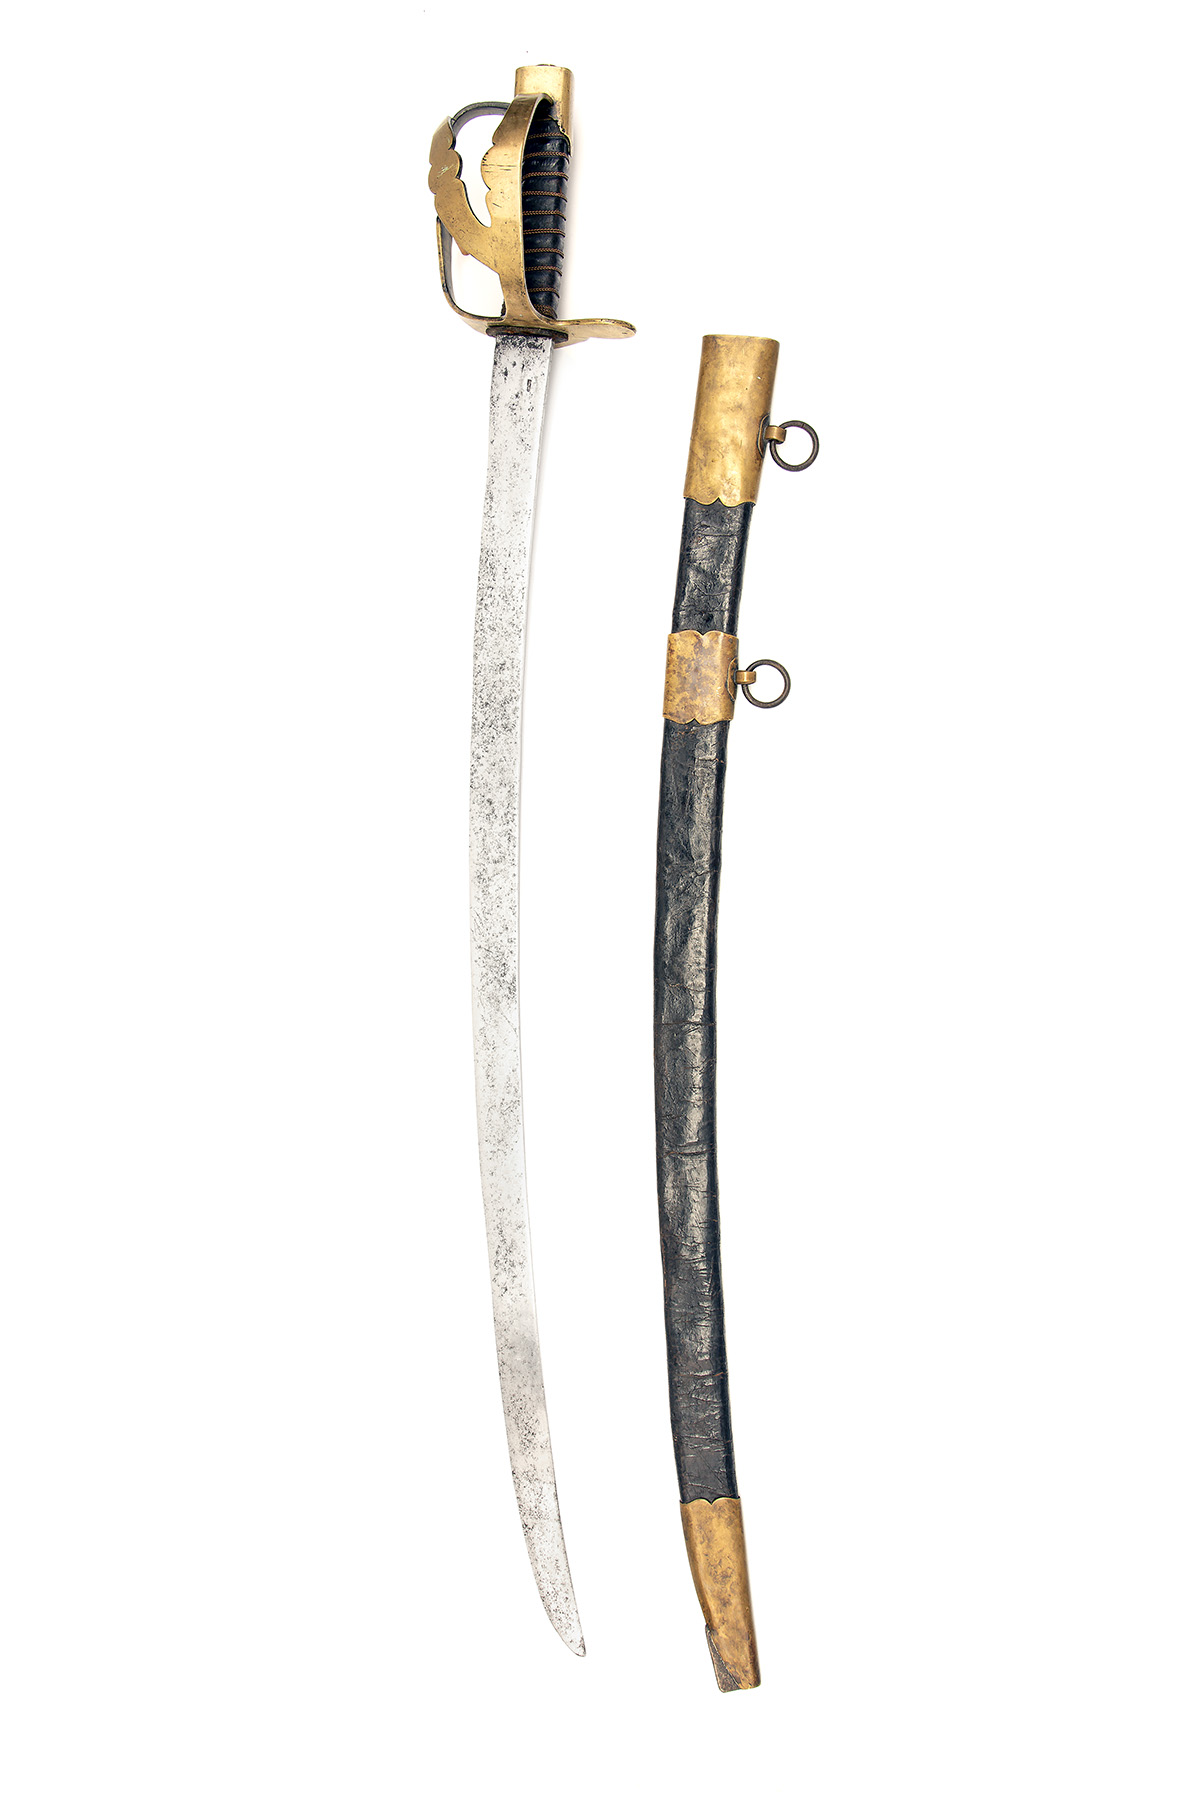 A RARE FRENCH 1790 PATTERN 'CHASSEUR A CHEVAL' TROOPER'S SWORD, circa 1800 and made specifically for